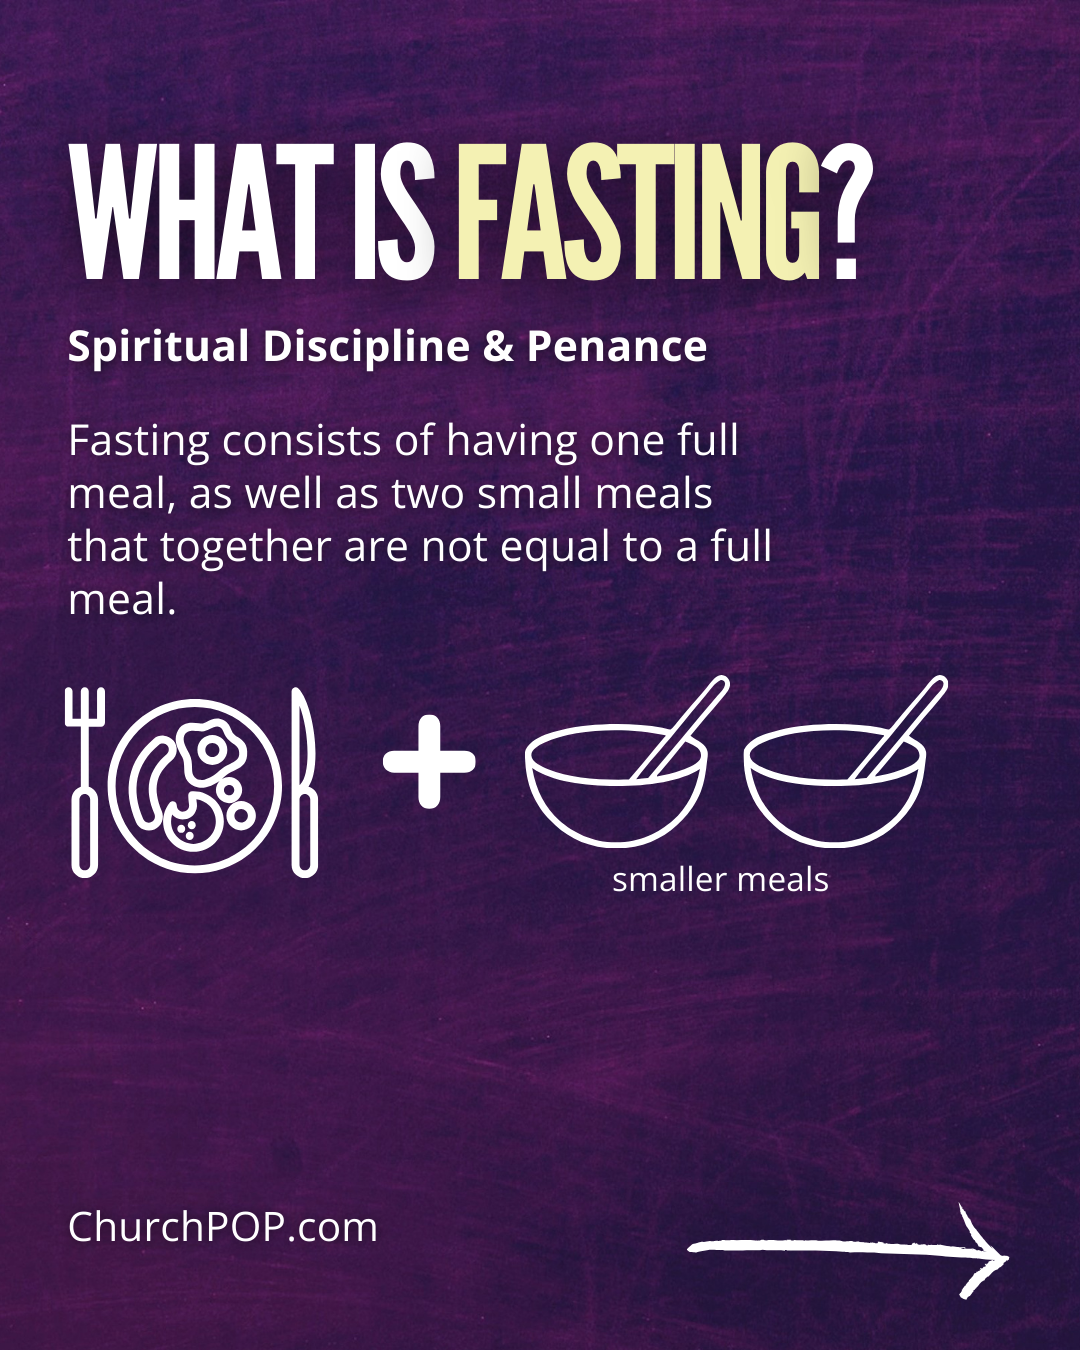 What is fasting?, lent and fasting, lent fast rules, lent fasting ash wednesday